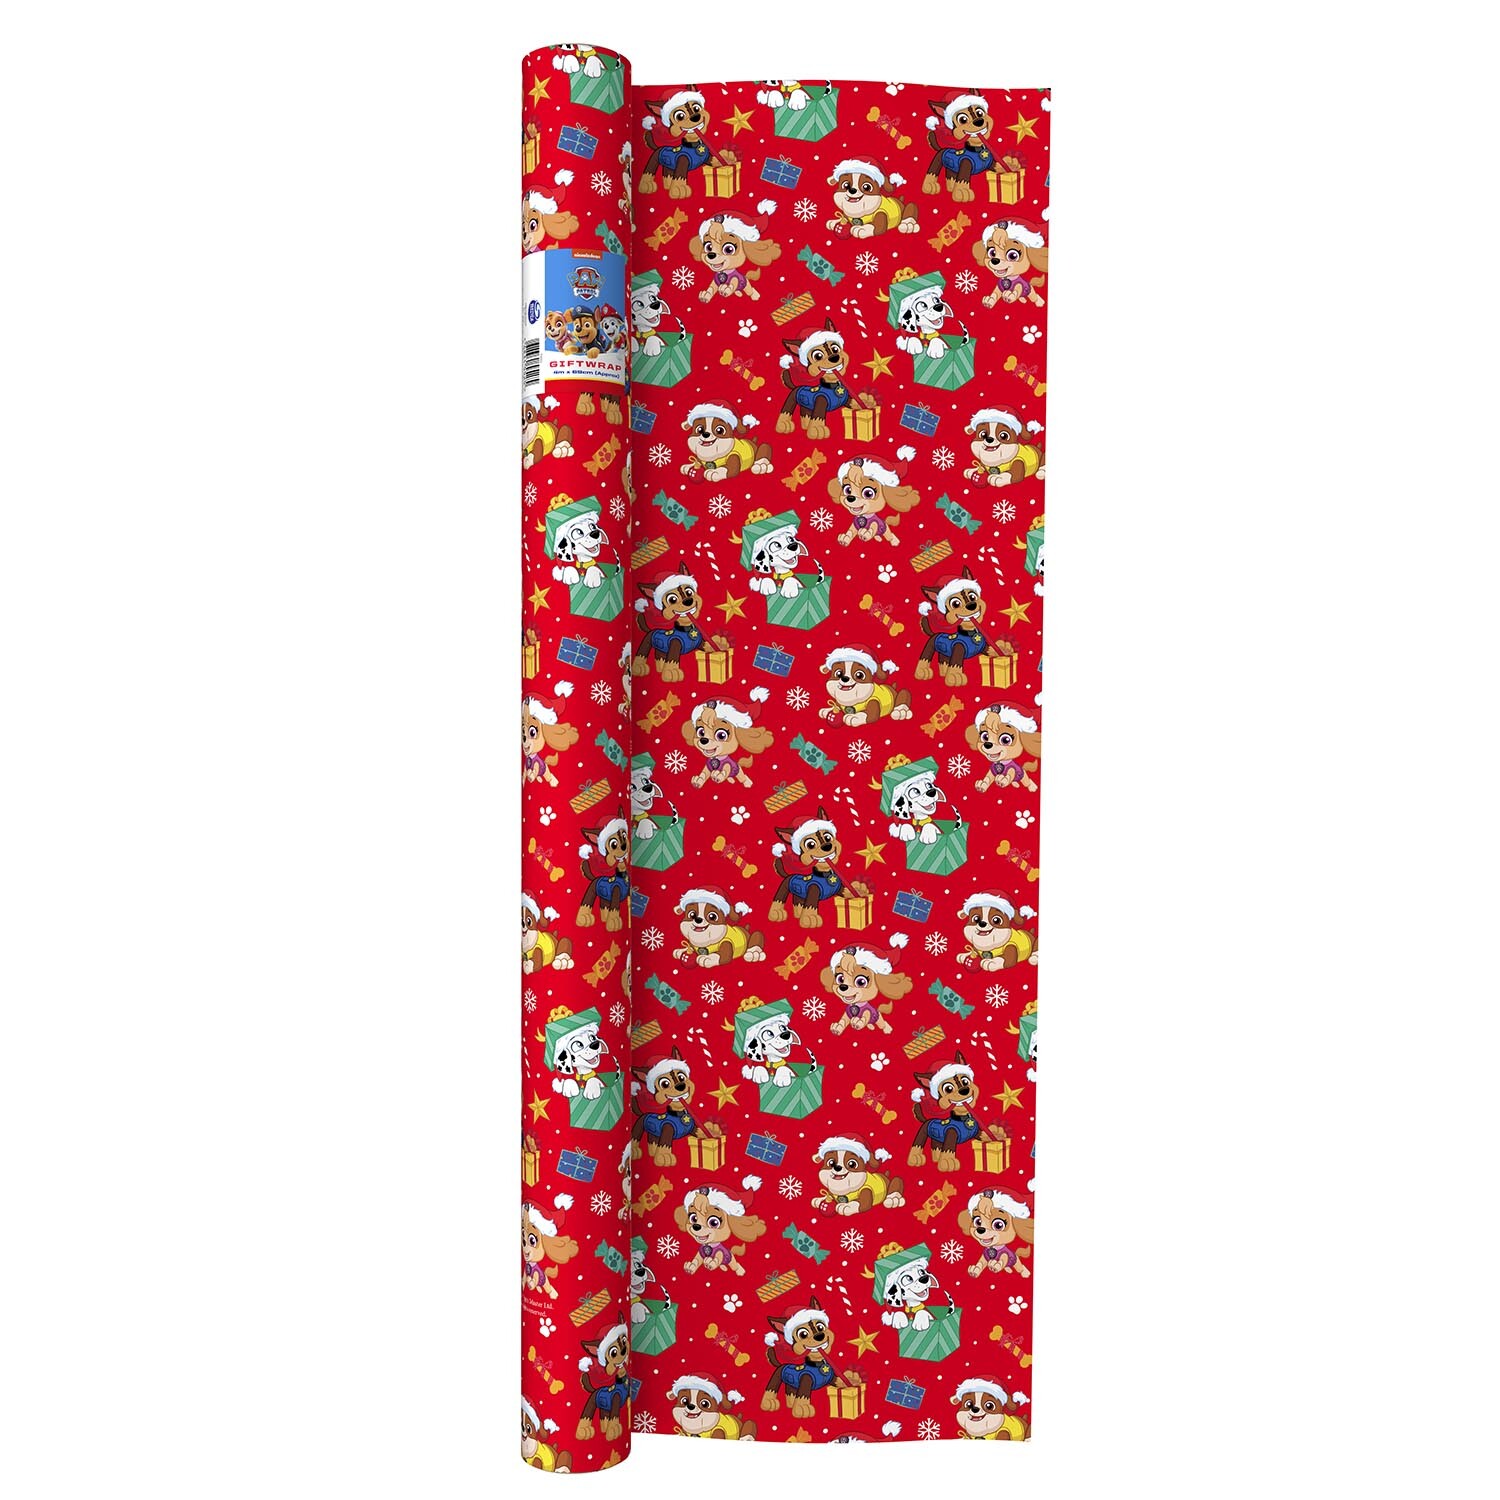 4m Paw Patrol Wrapping Paper - Red Image 1